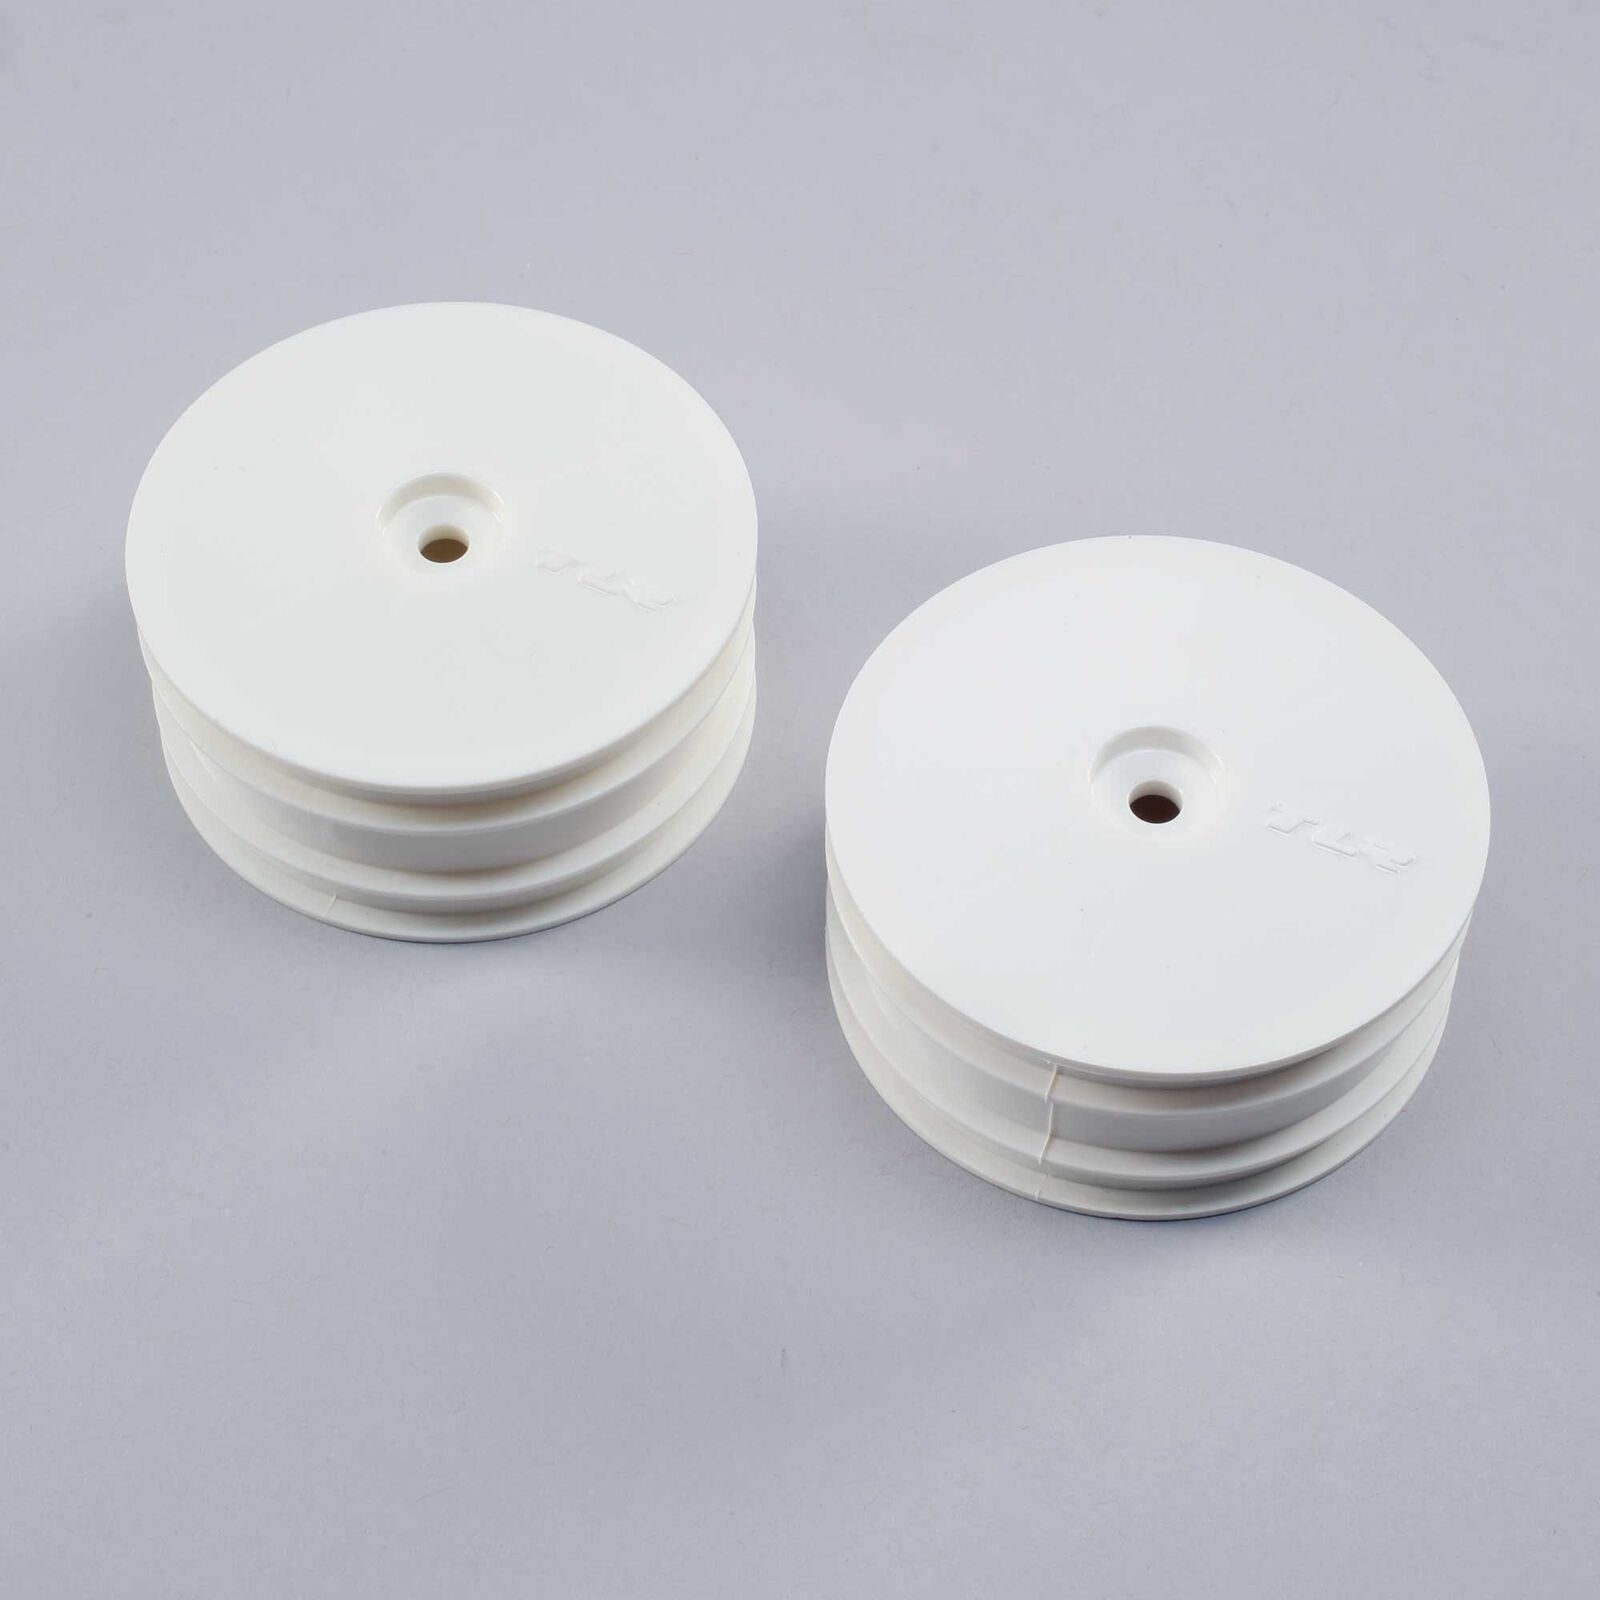 Team Losi Racing 22X-4 12mm Hex 4WD Front Buggy Wheels (2) (White) - TLR43022 - [Sunshine-Coast] - Losi - [RC-Car] - [Scale-Model]